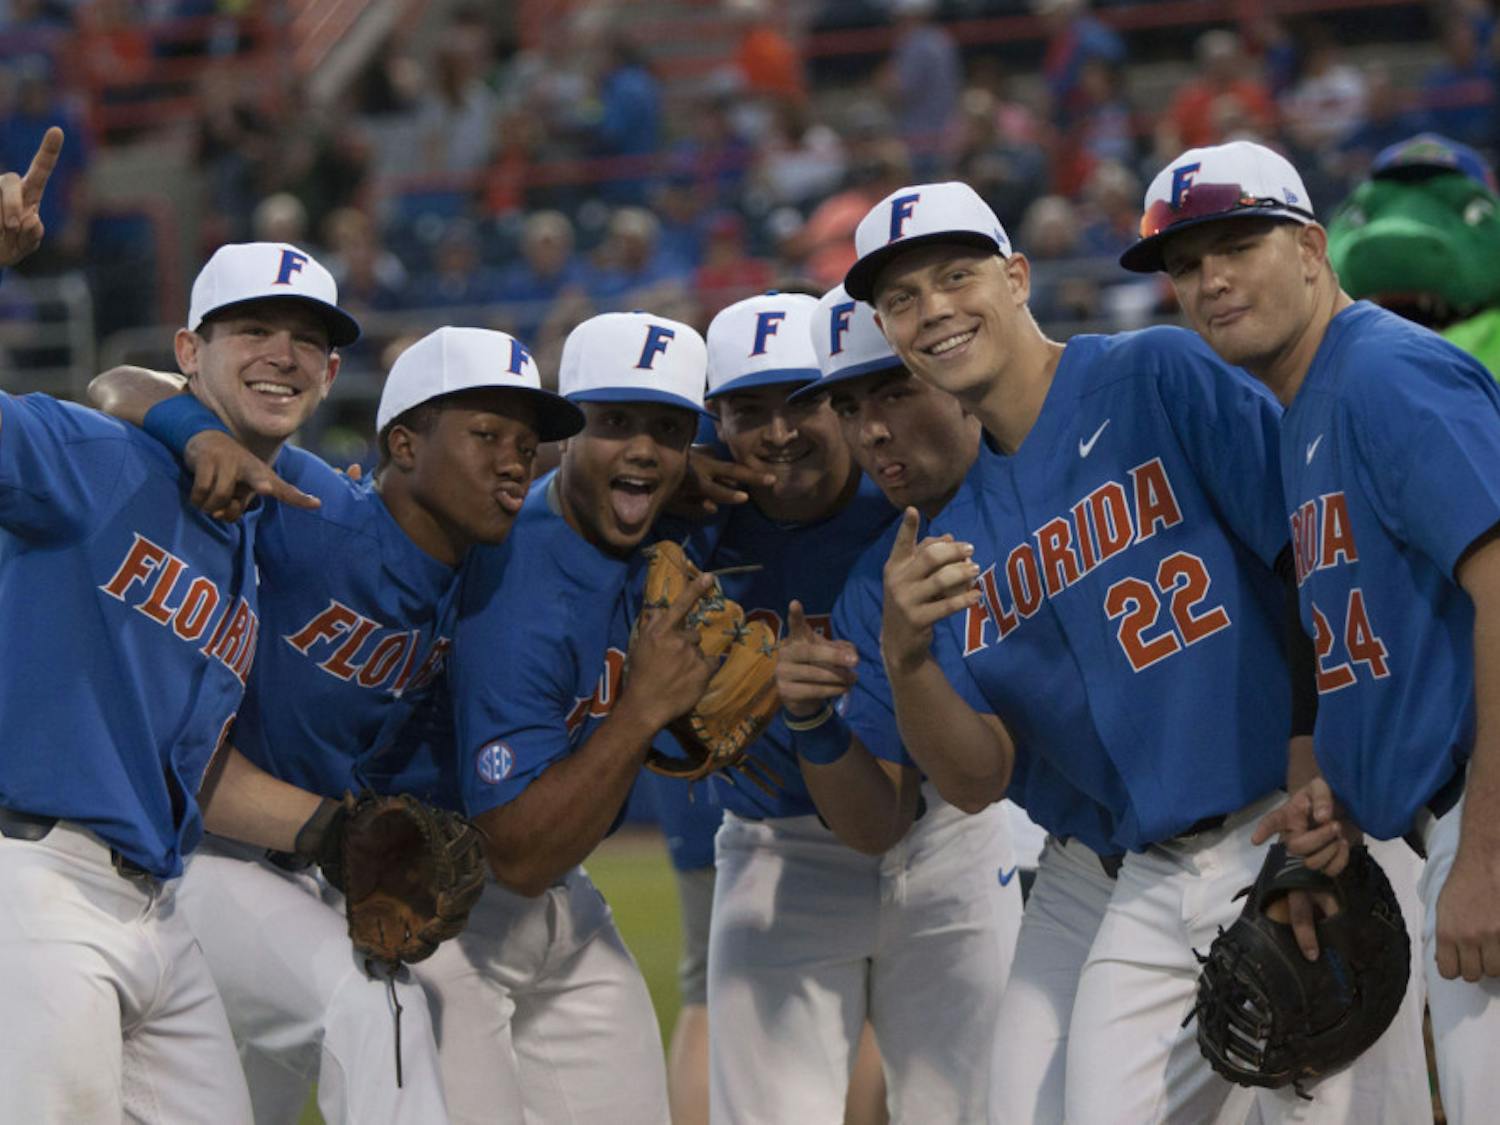 Florida’s baseball team poses for a photo before its 2-0 win against Miami on Feb. 25, 2017, at McKethan Stadium.